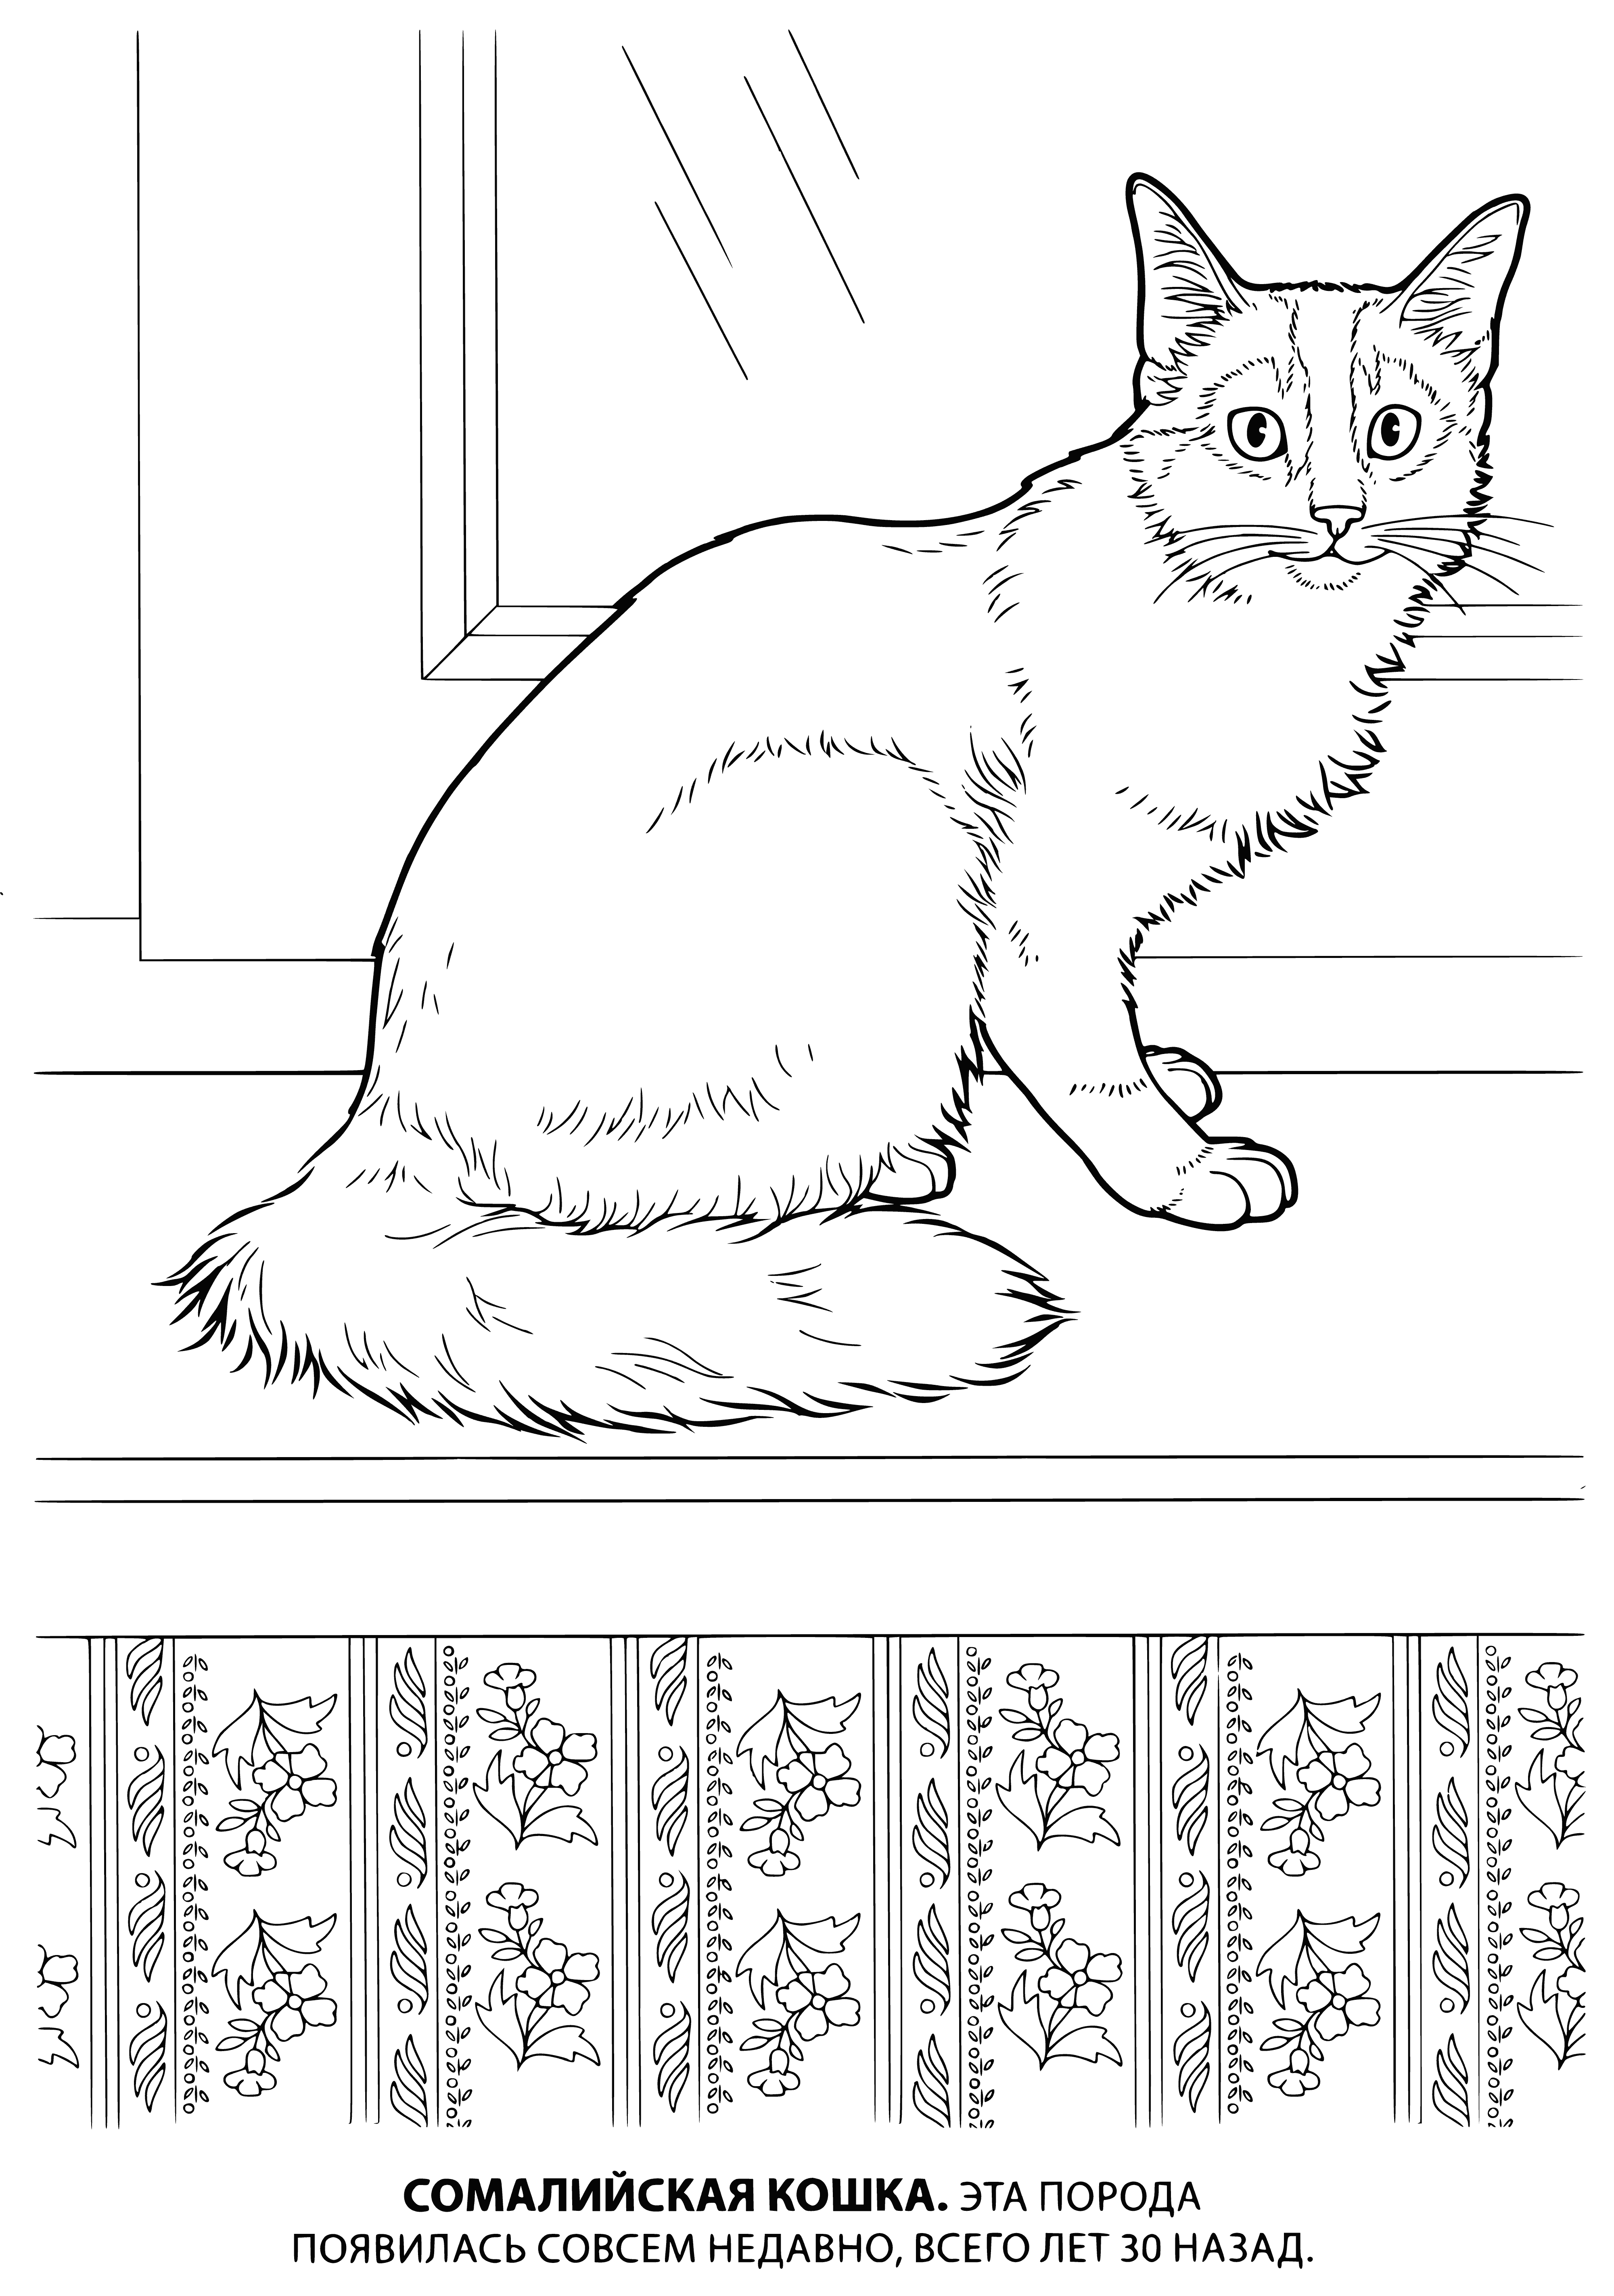 Somali cat coloring page